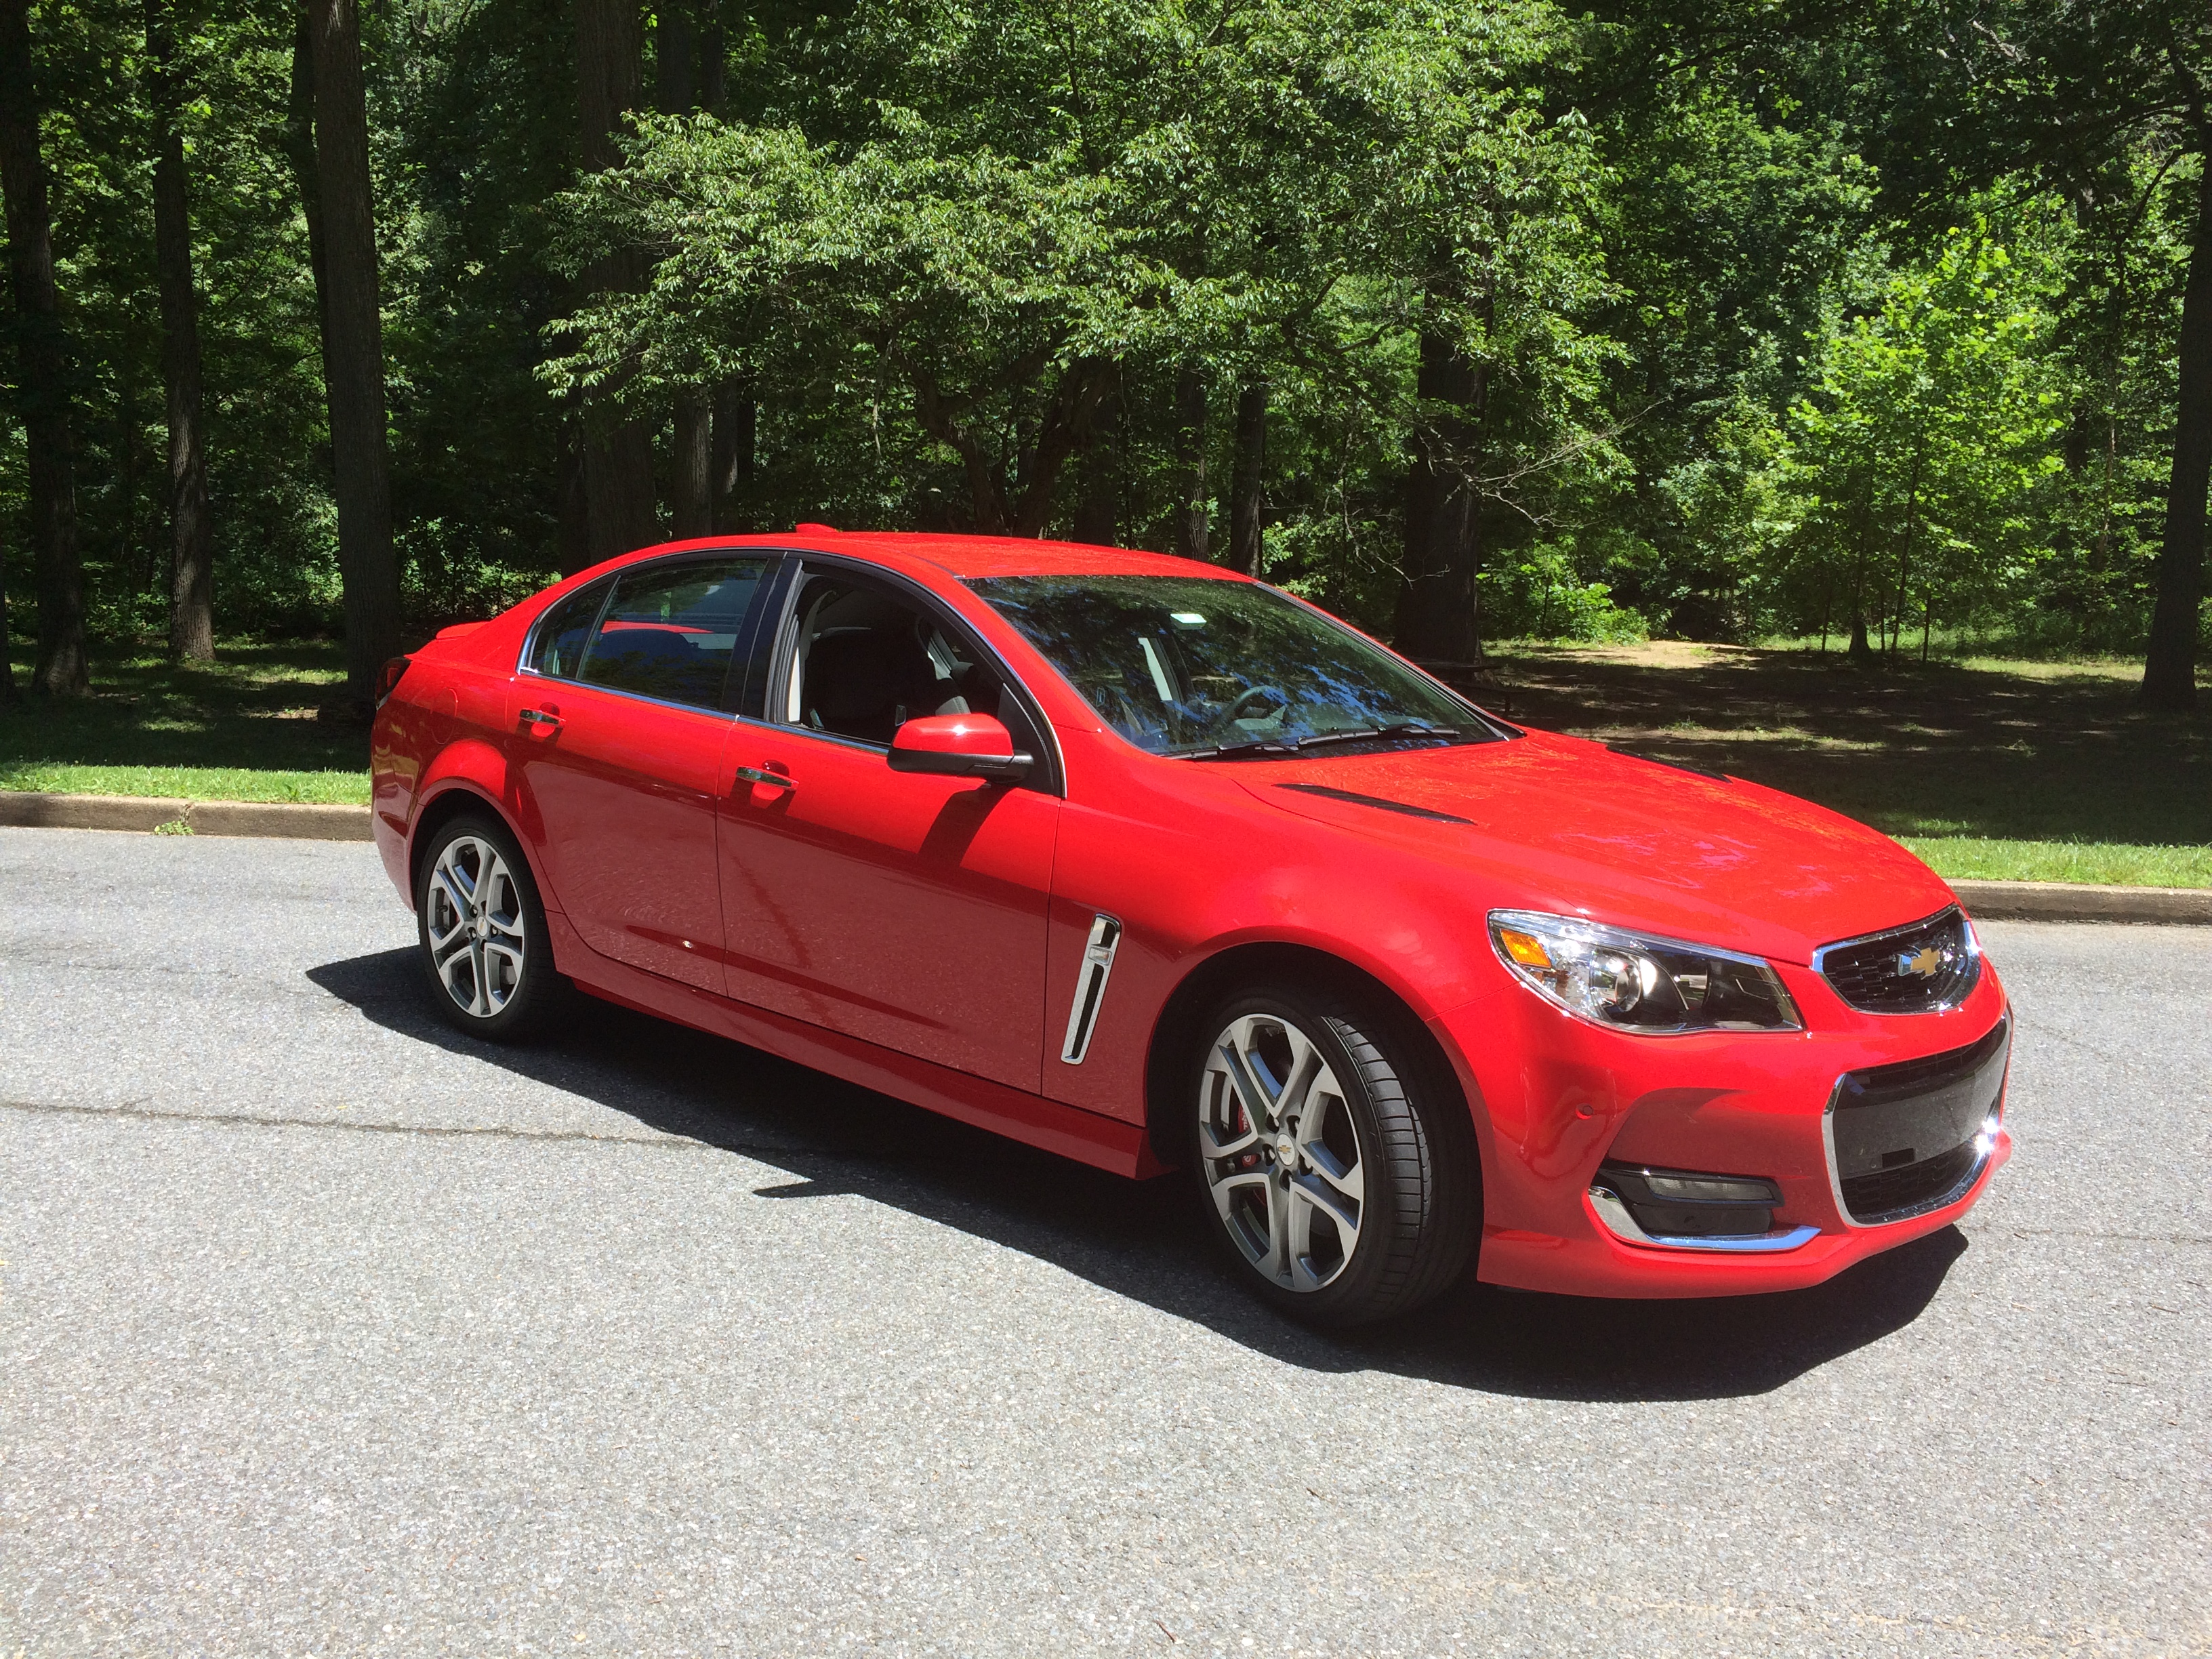 Chevrolet SS accessories model